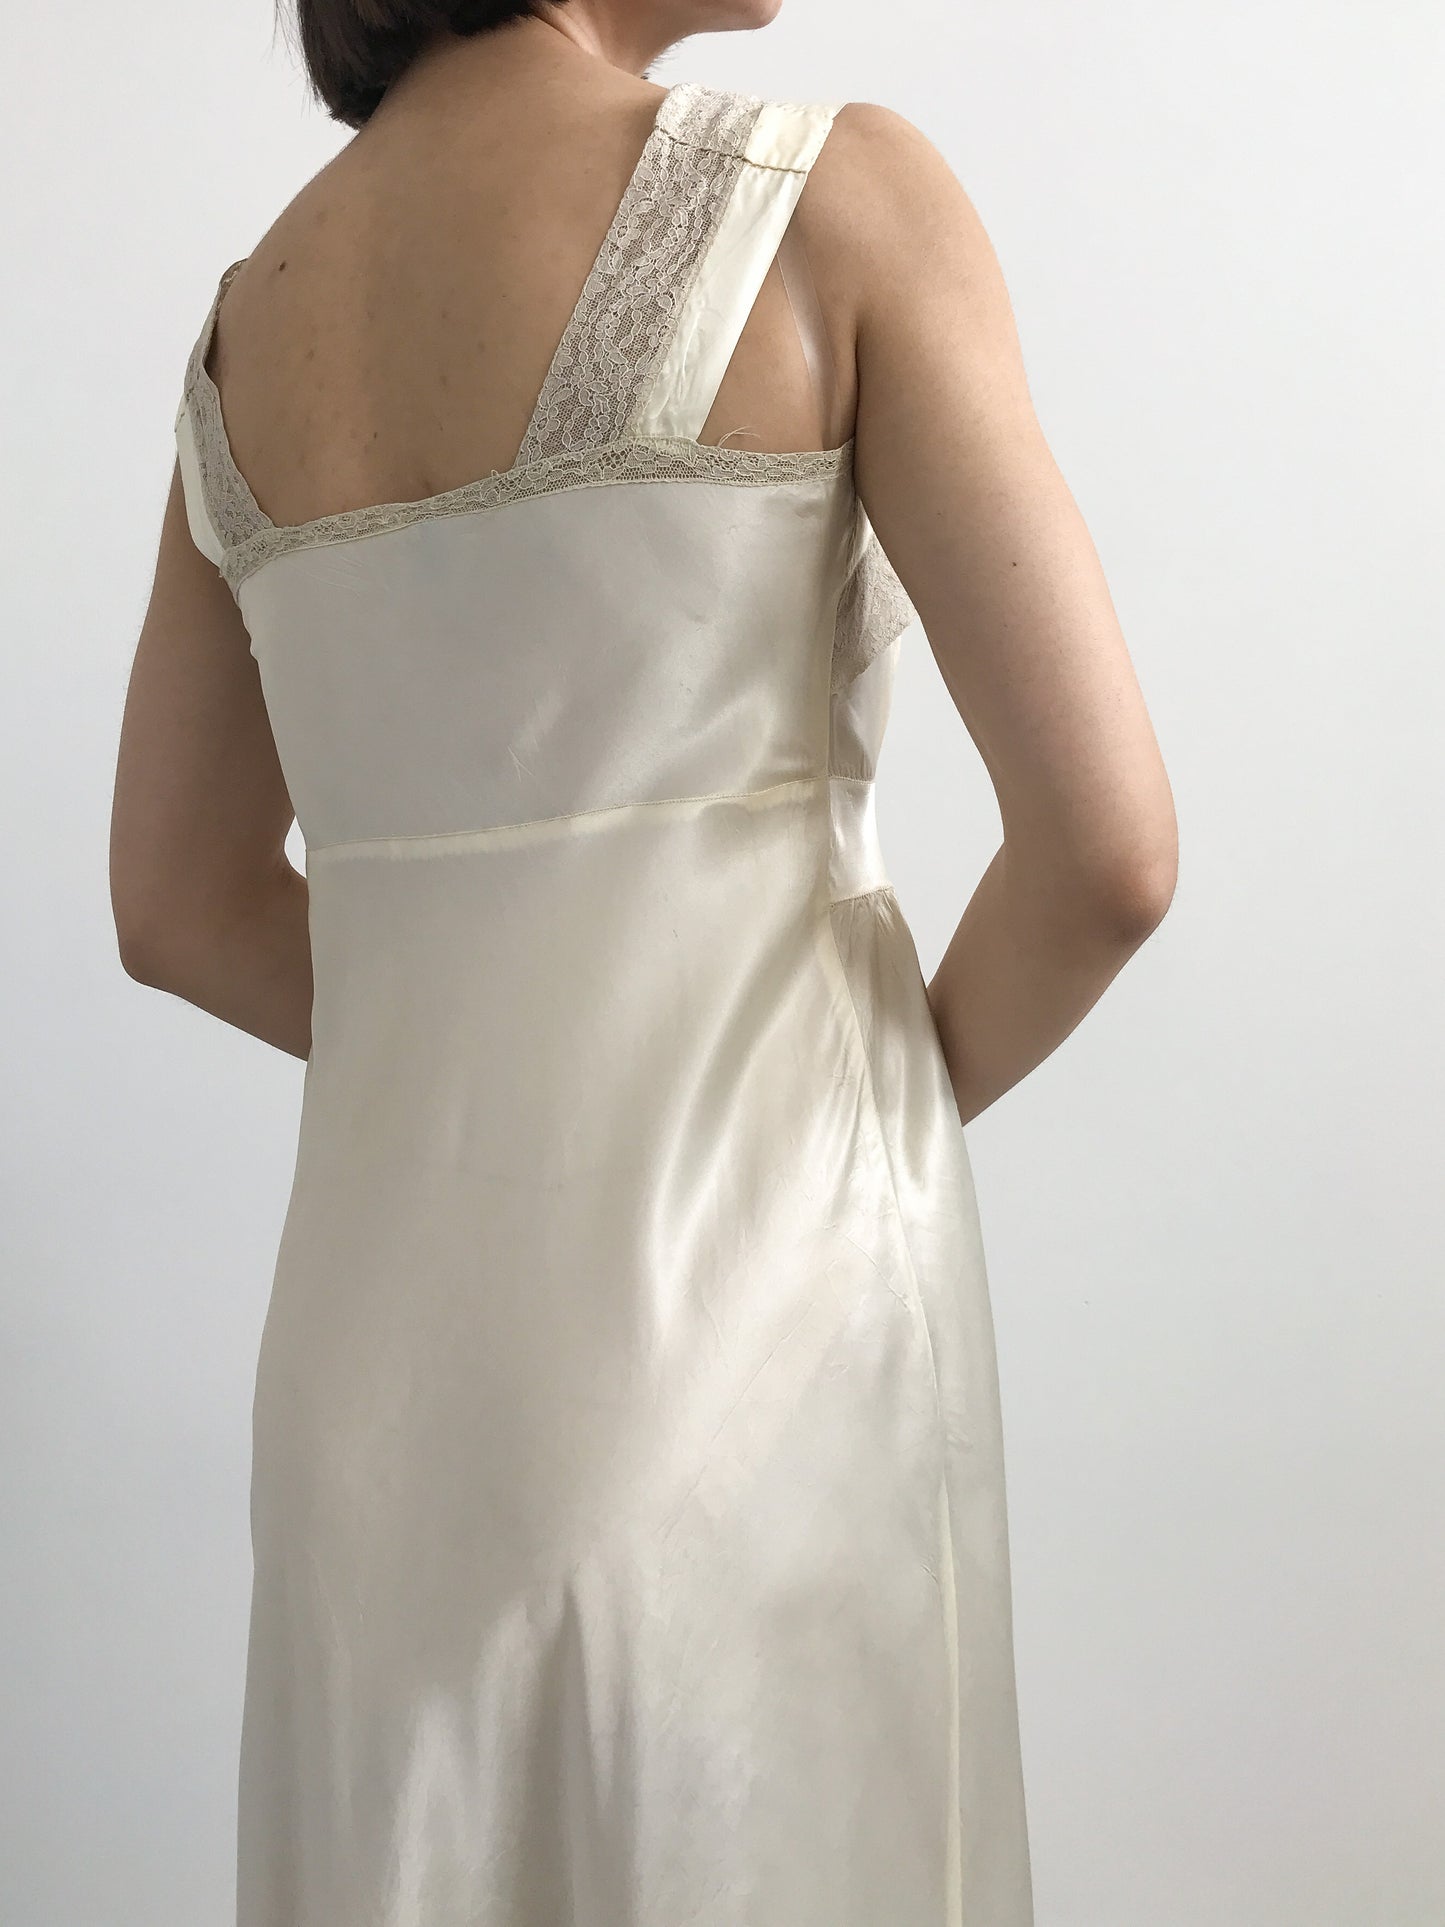 1930s Champagne Lace & Satin Slip Gown